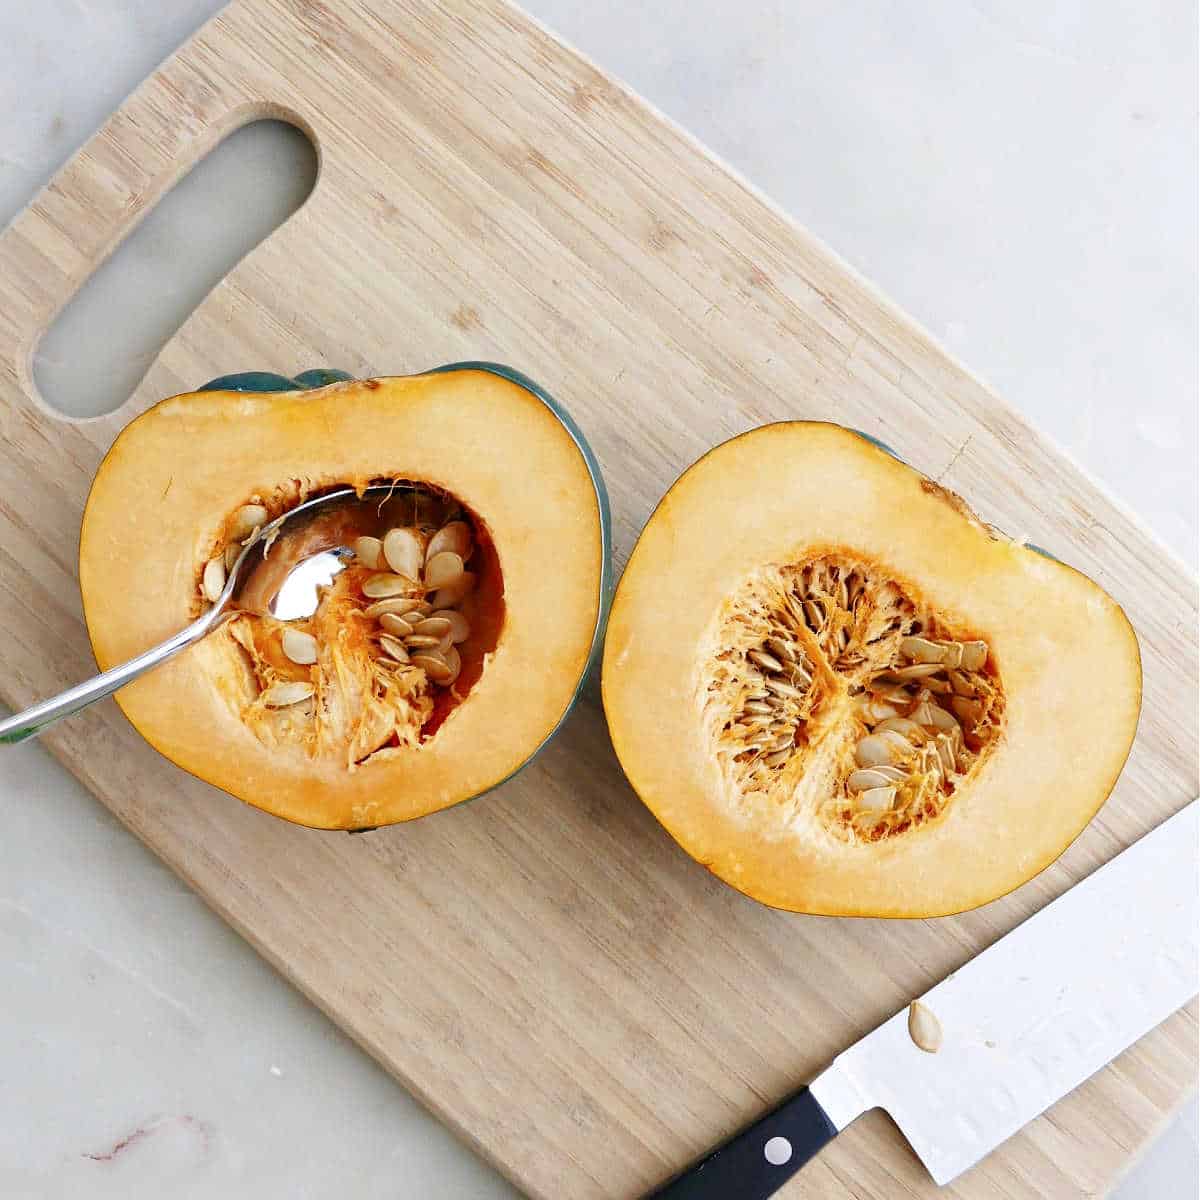 acorn squash cut in half on a cutting board with spoon scooping out seeds